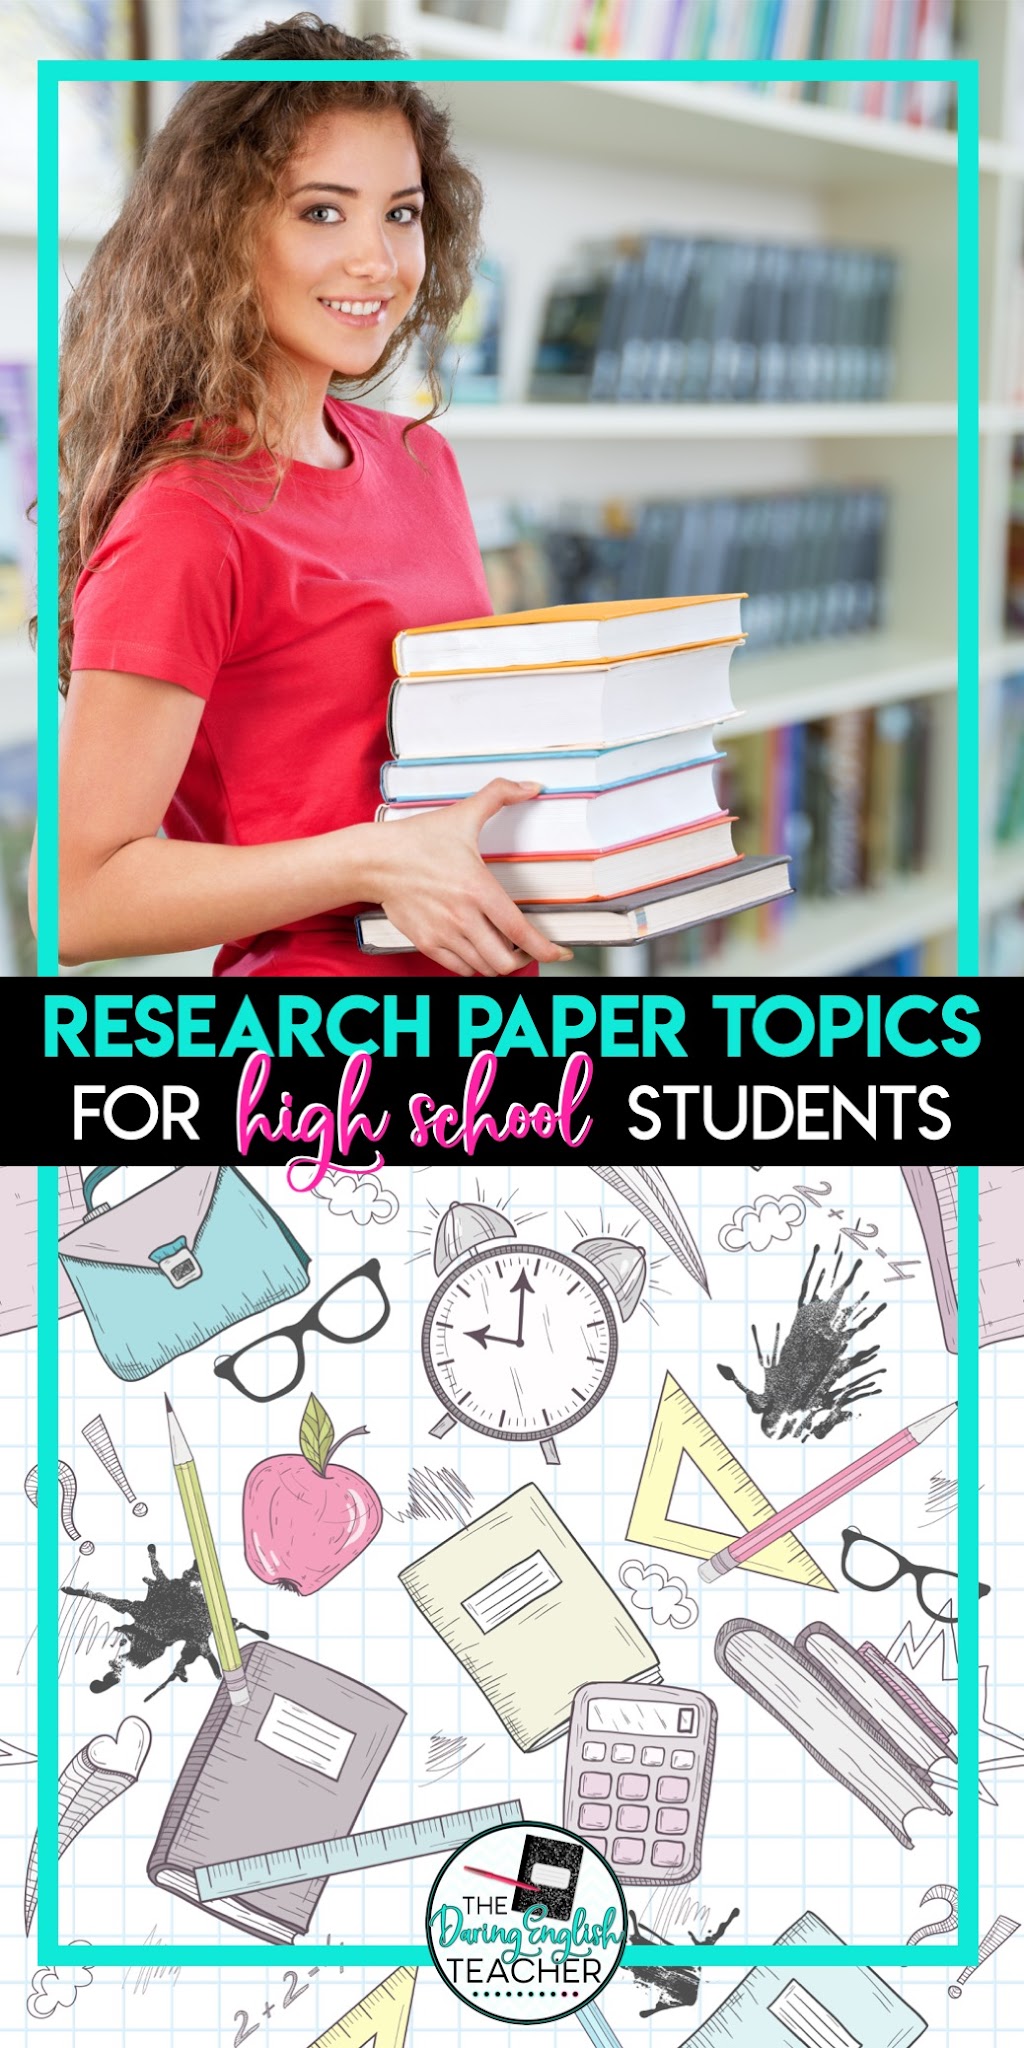 Research Paper Topics for High School Students